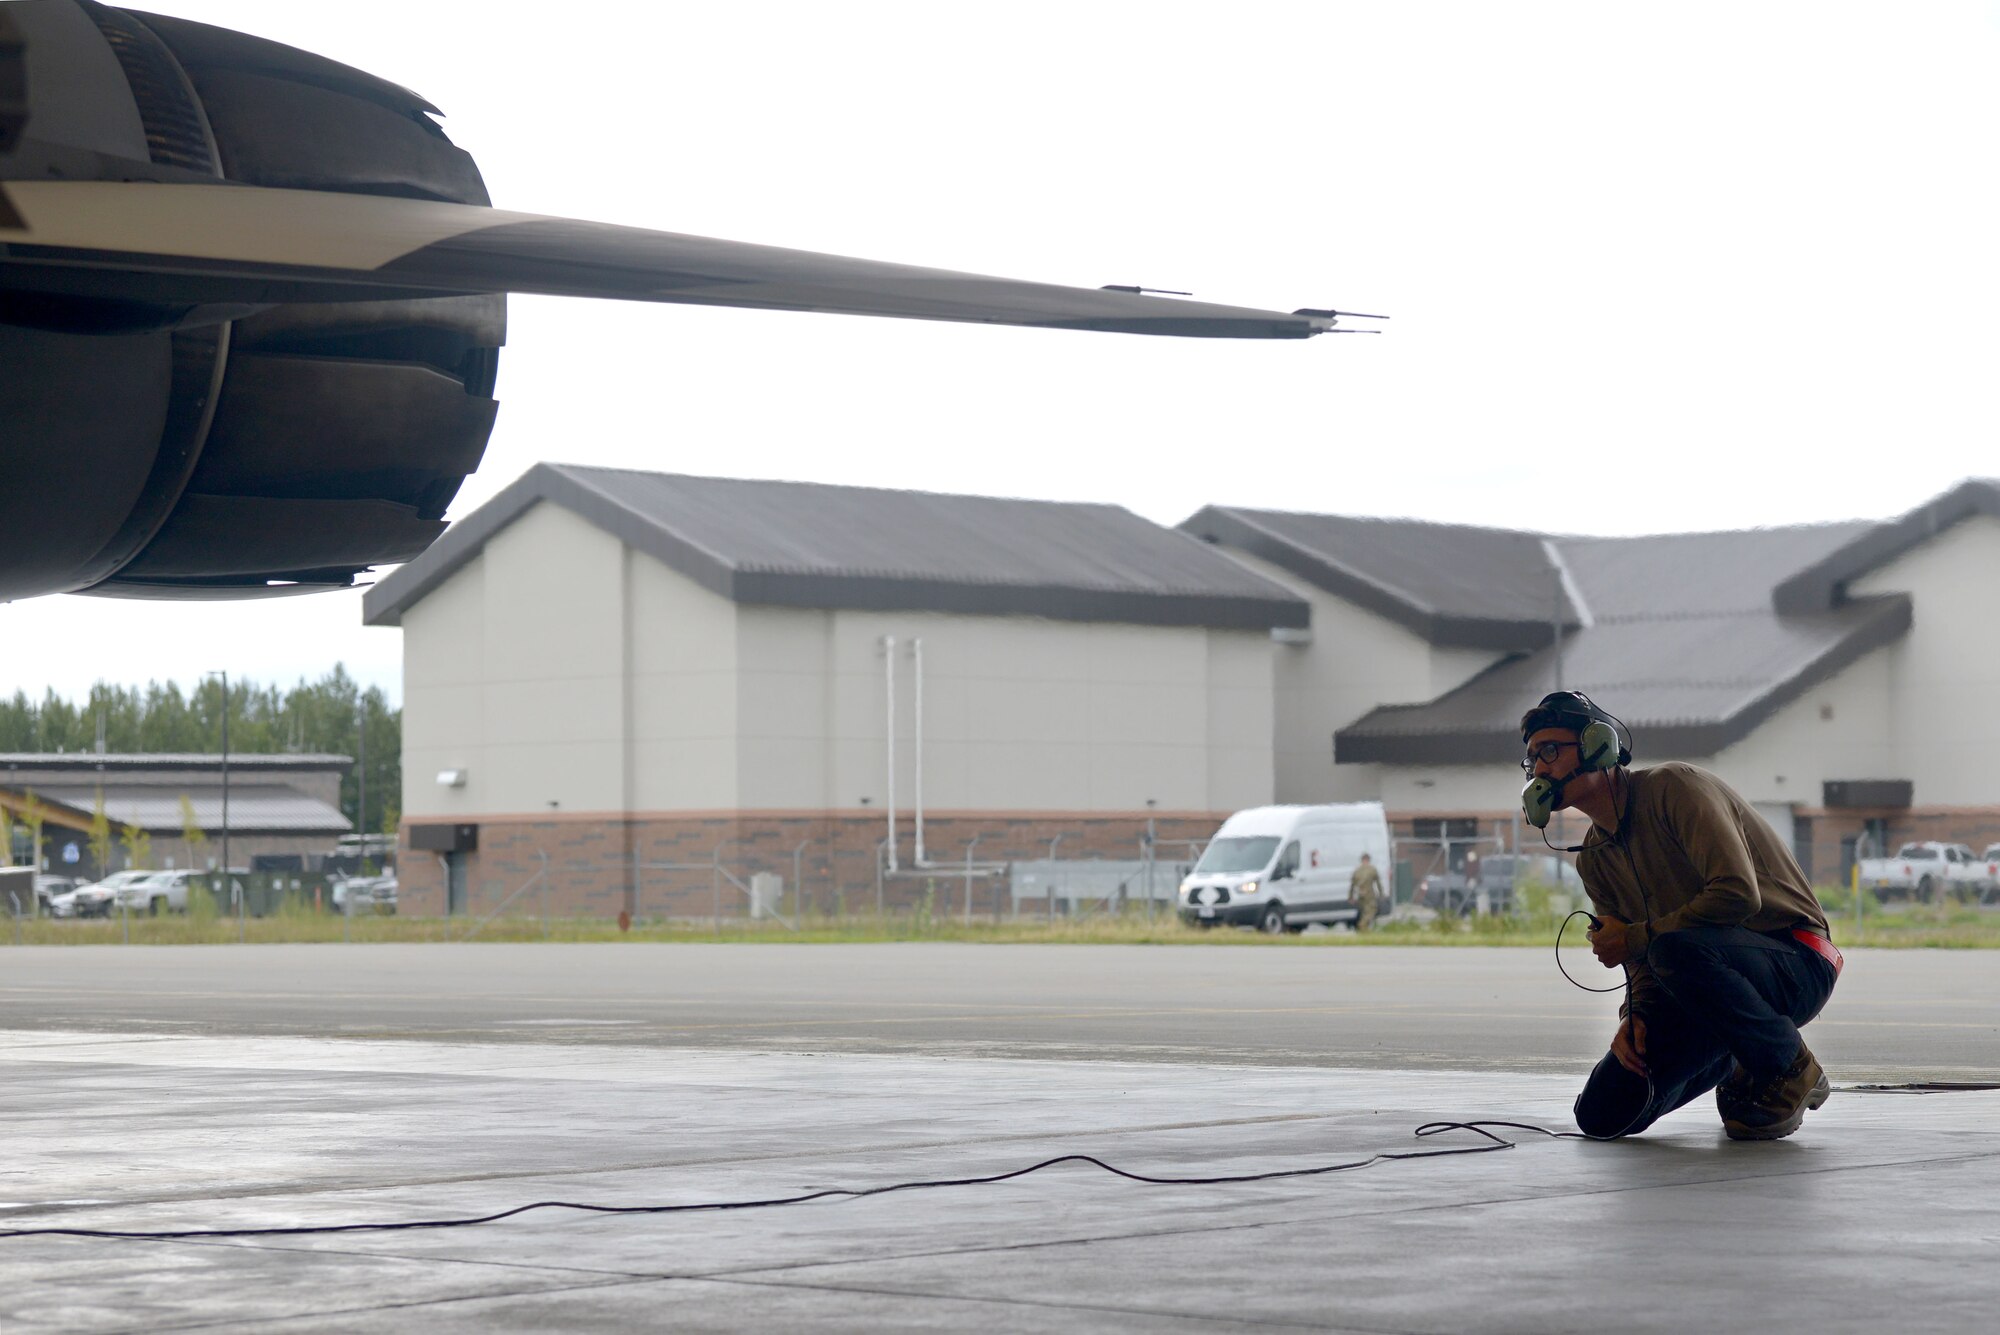 U.S. Air Force Airman 1st Class Jacob Camacho, an 18th Aircraft Maintenance Unit (AMU) crew chief, inspects the back of an F-16 Fighting Falcon aircraft during RED FLAG-Alaska 20-3 on Eielson Air Force Base, Alaska, Aug. 4, 2020. The 18th AMU provides aircraft and munitions maintenance support to the 354th Fighter Wing's aggressor aircraft operating at Eielson AFB.  (U.S. Air Force photo by Senior Airman Beaux Hebert)